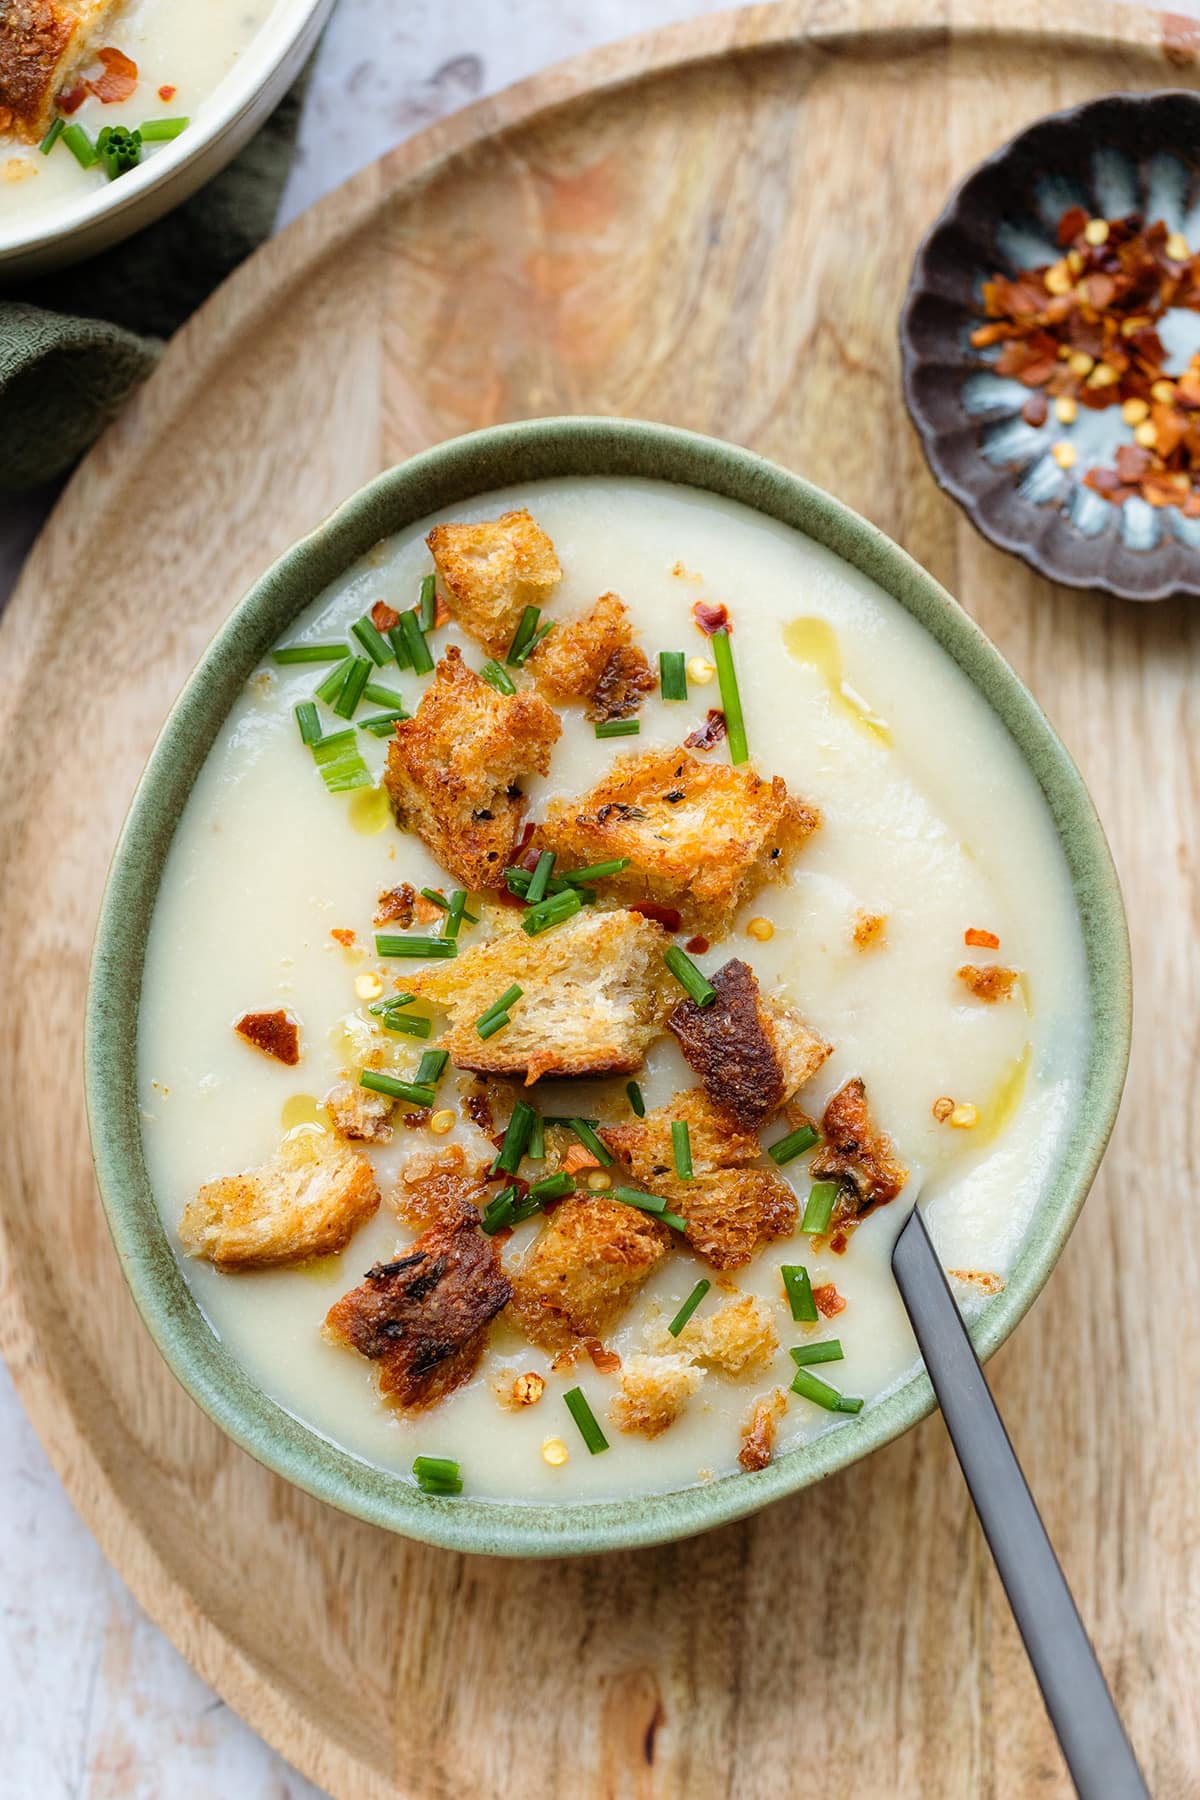 Cauliflower soup topped with croutons, fresh chives, and chili flakes in a green bowl on a wooden decorative plate.